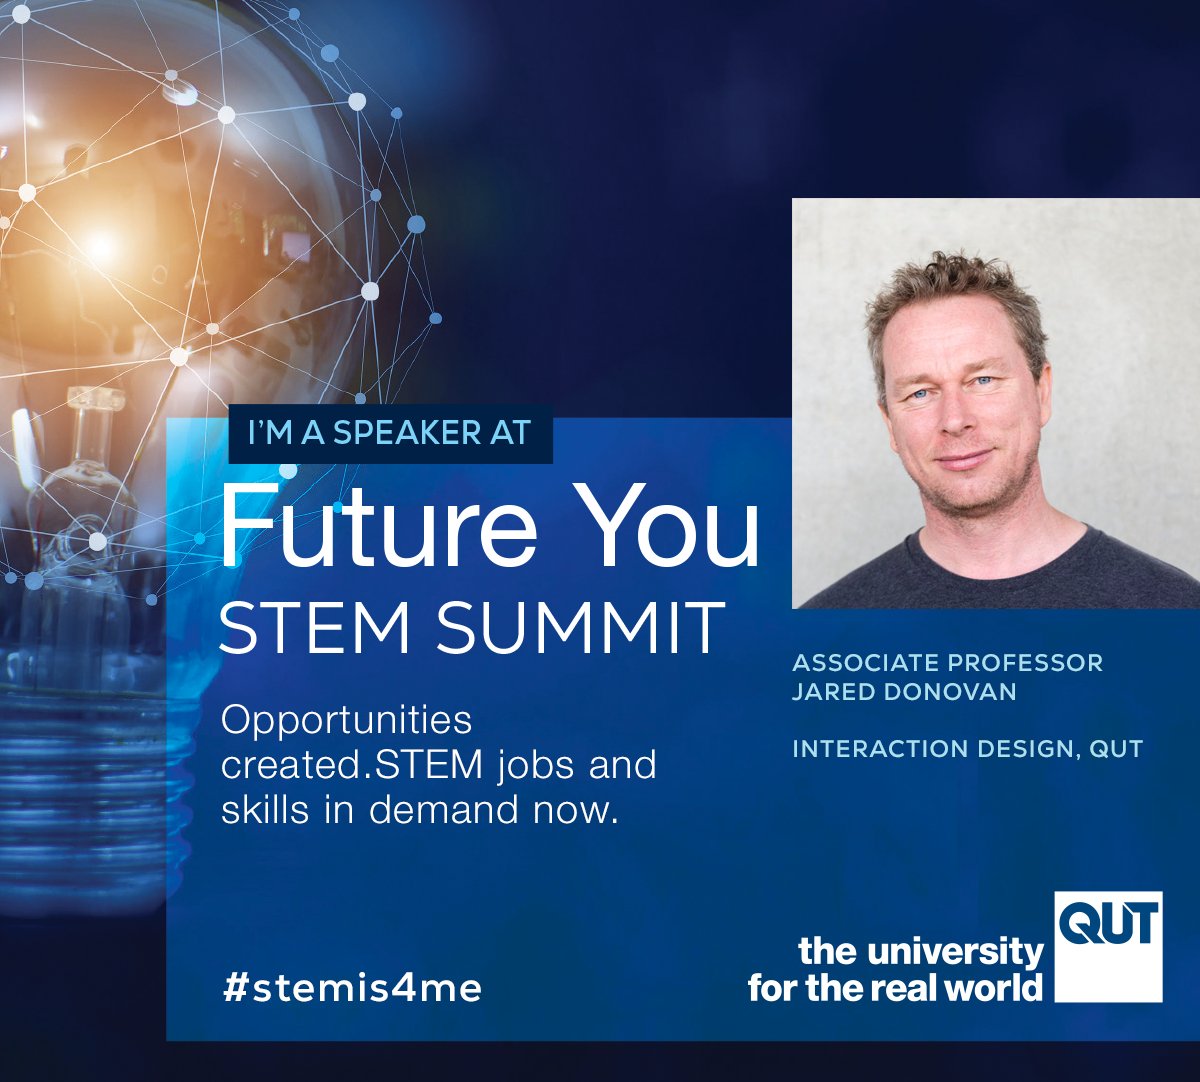 Looking forward to the Future You STEM Summit next week at the Queensland University of Technology (QUT). I'll be talking about AI and Design with high-achieving Year 11 and 12 students from Brisbane and regional Queensland schools. #ai4design #STEMis4me #QUTSTEM @QUTdesign